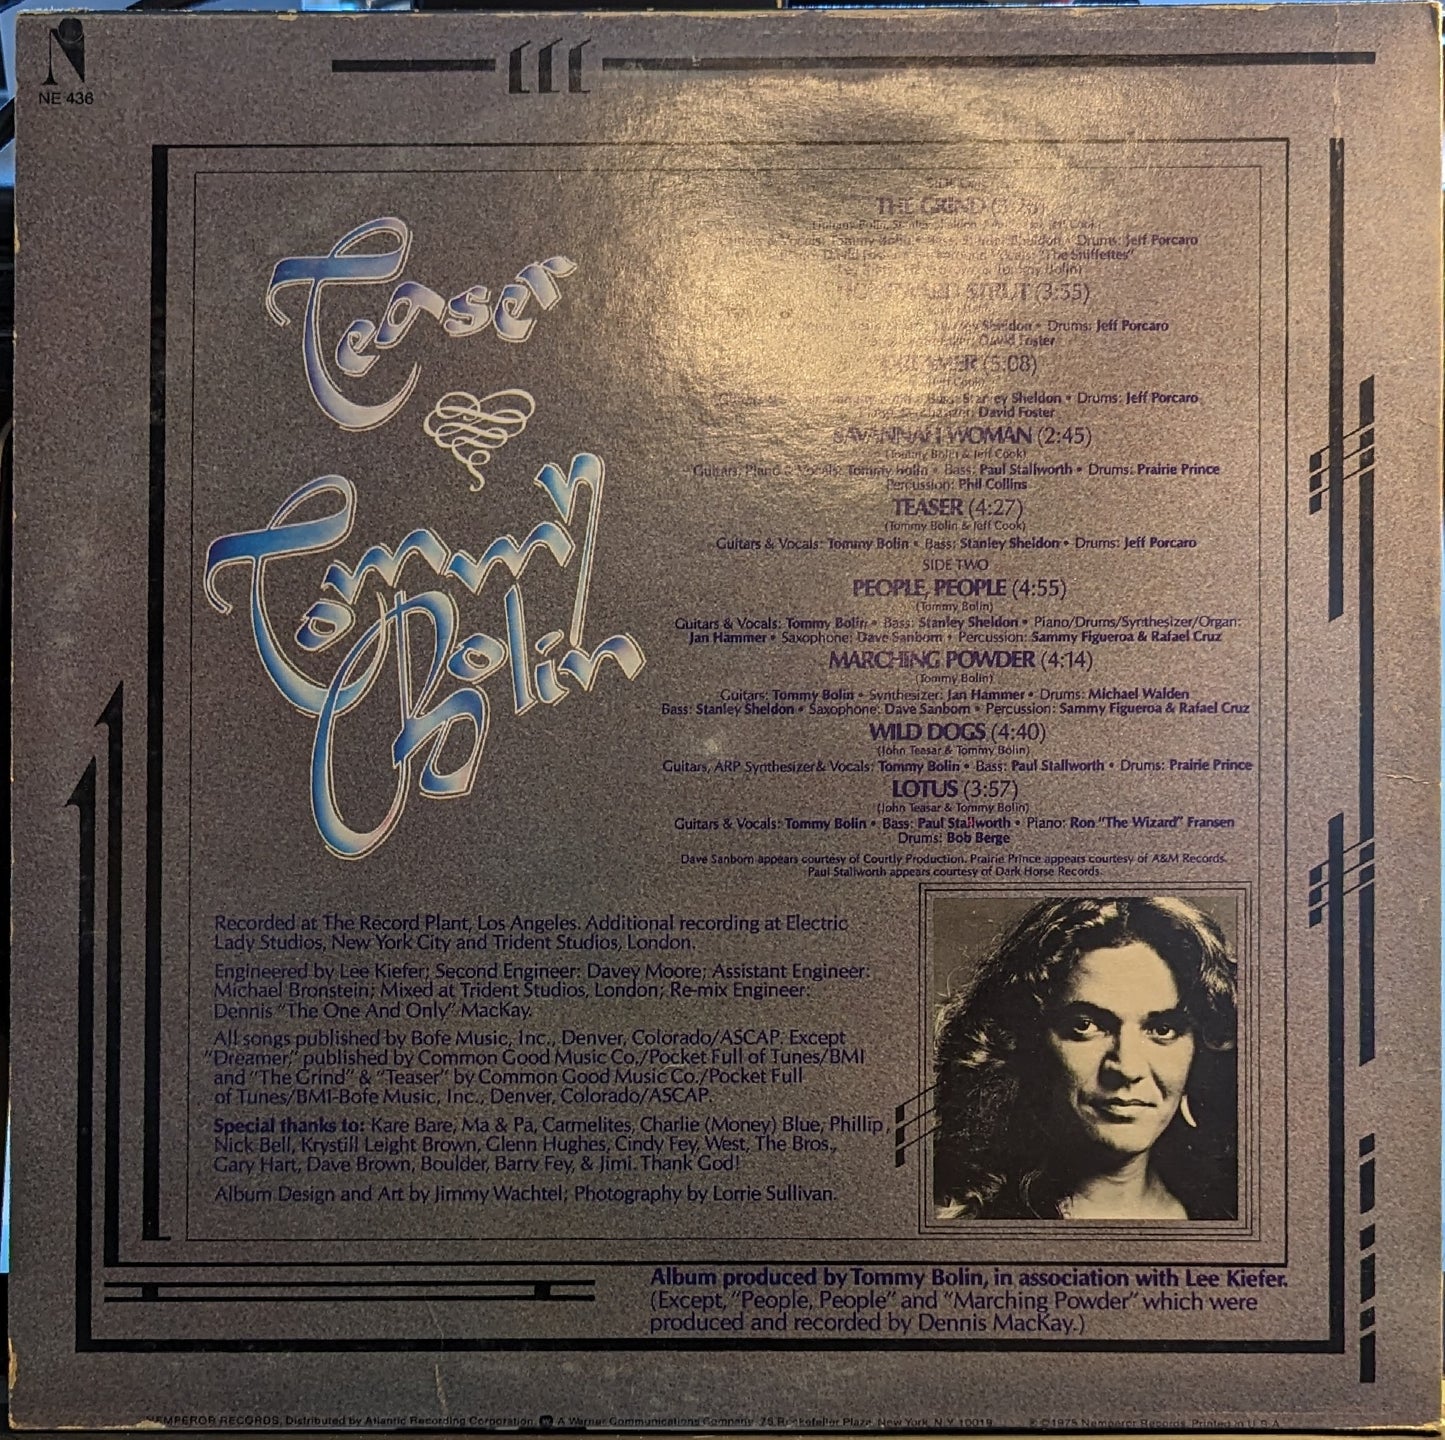 Tommy Bolin Teaser *PRESSWELL* LP Near Mint (NM or M-) Excellent (EX)